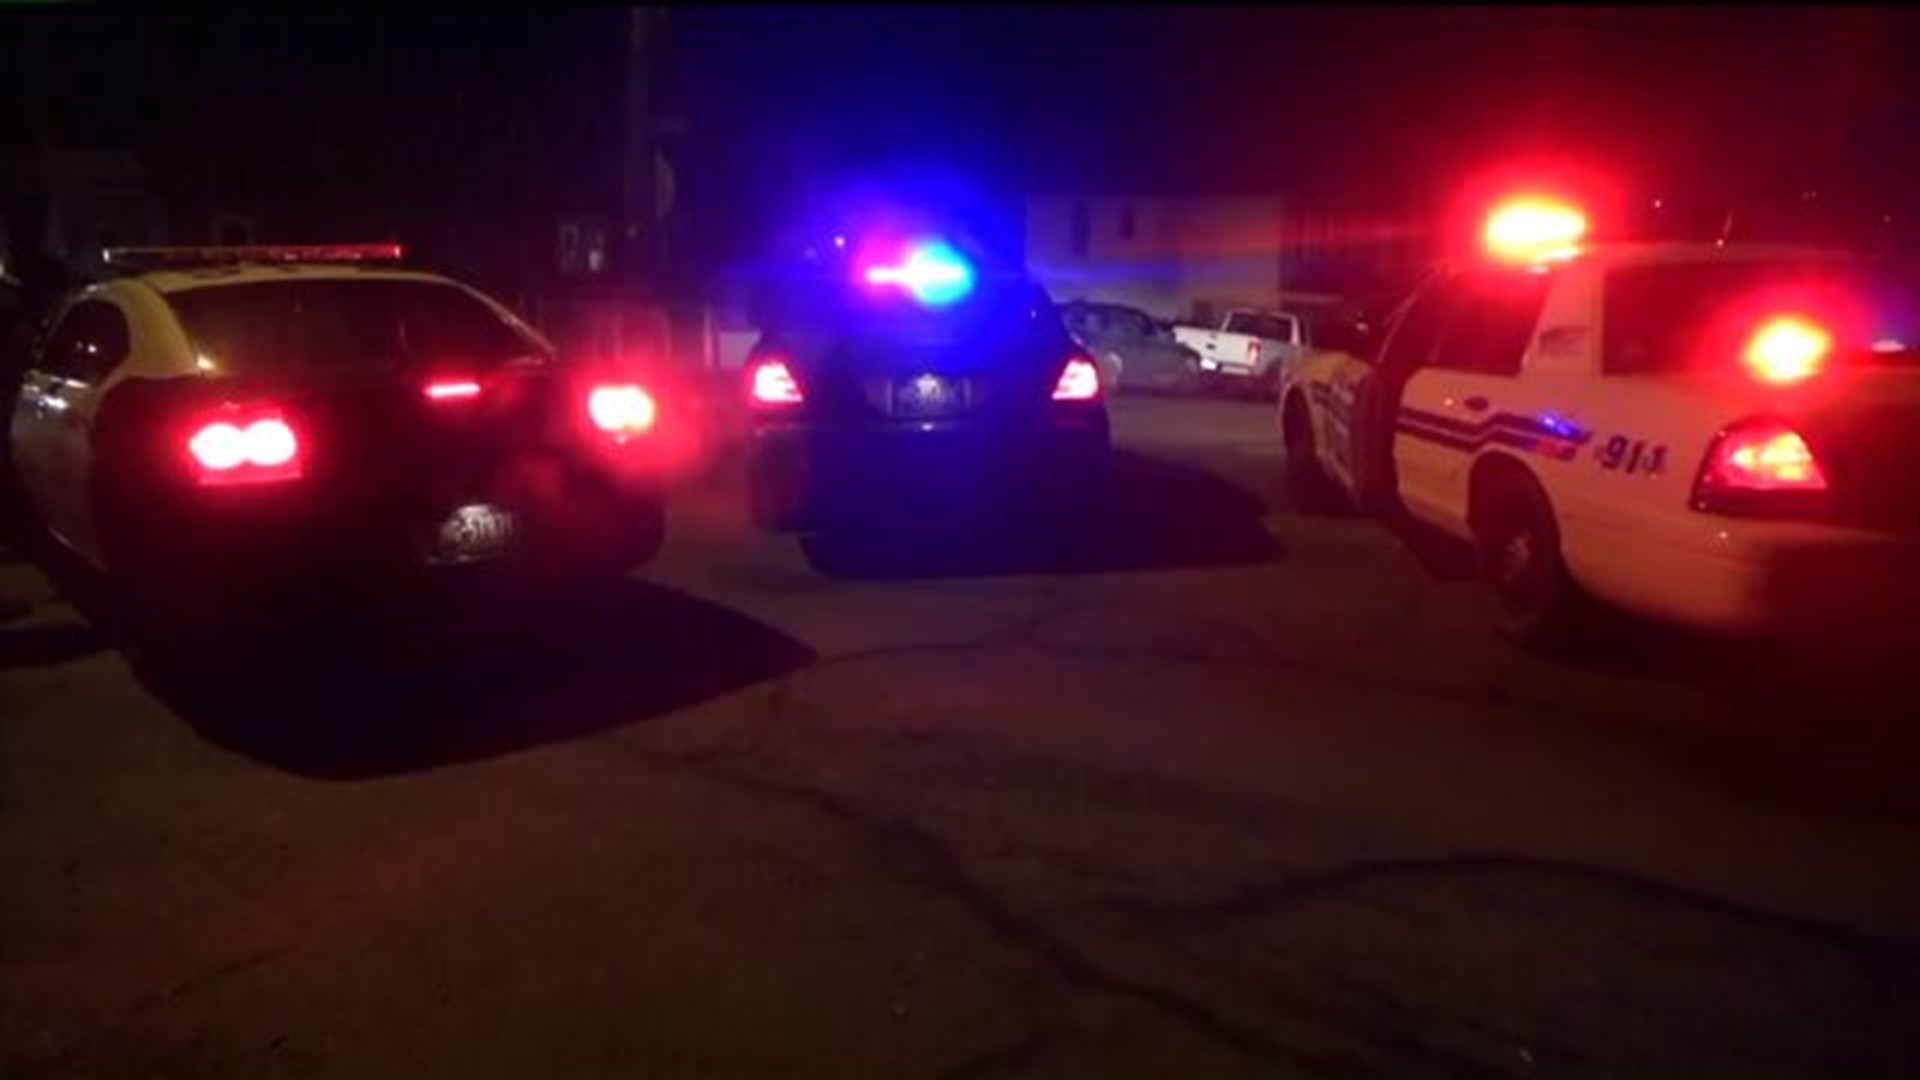 Police Respond to Reported Shooting in Carbondale